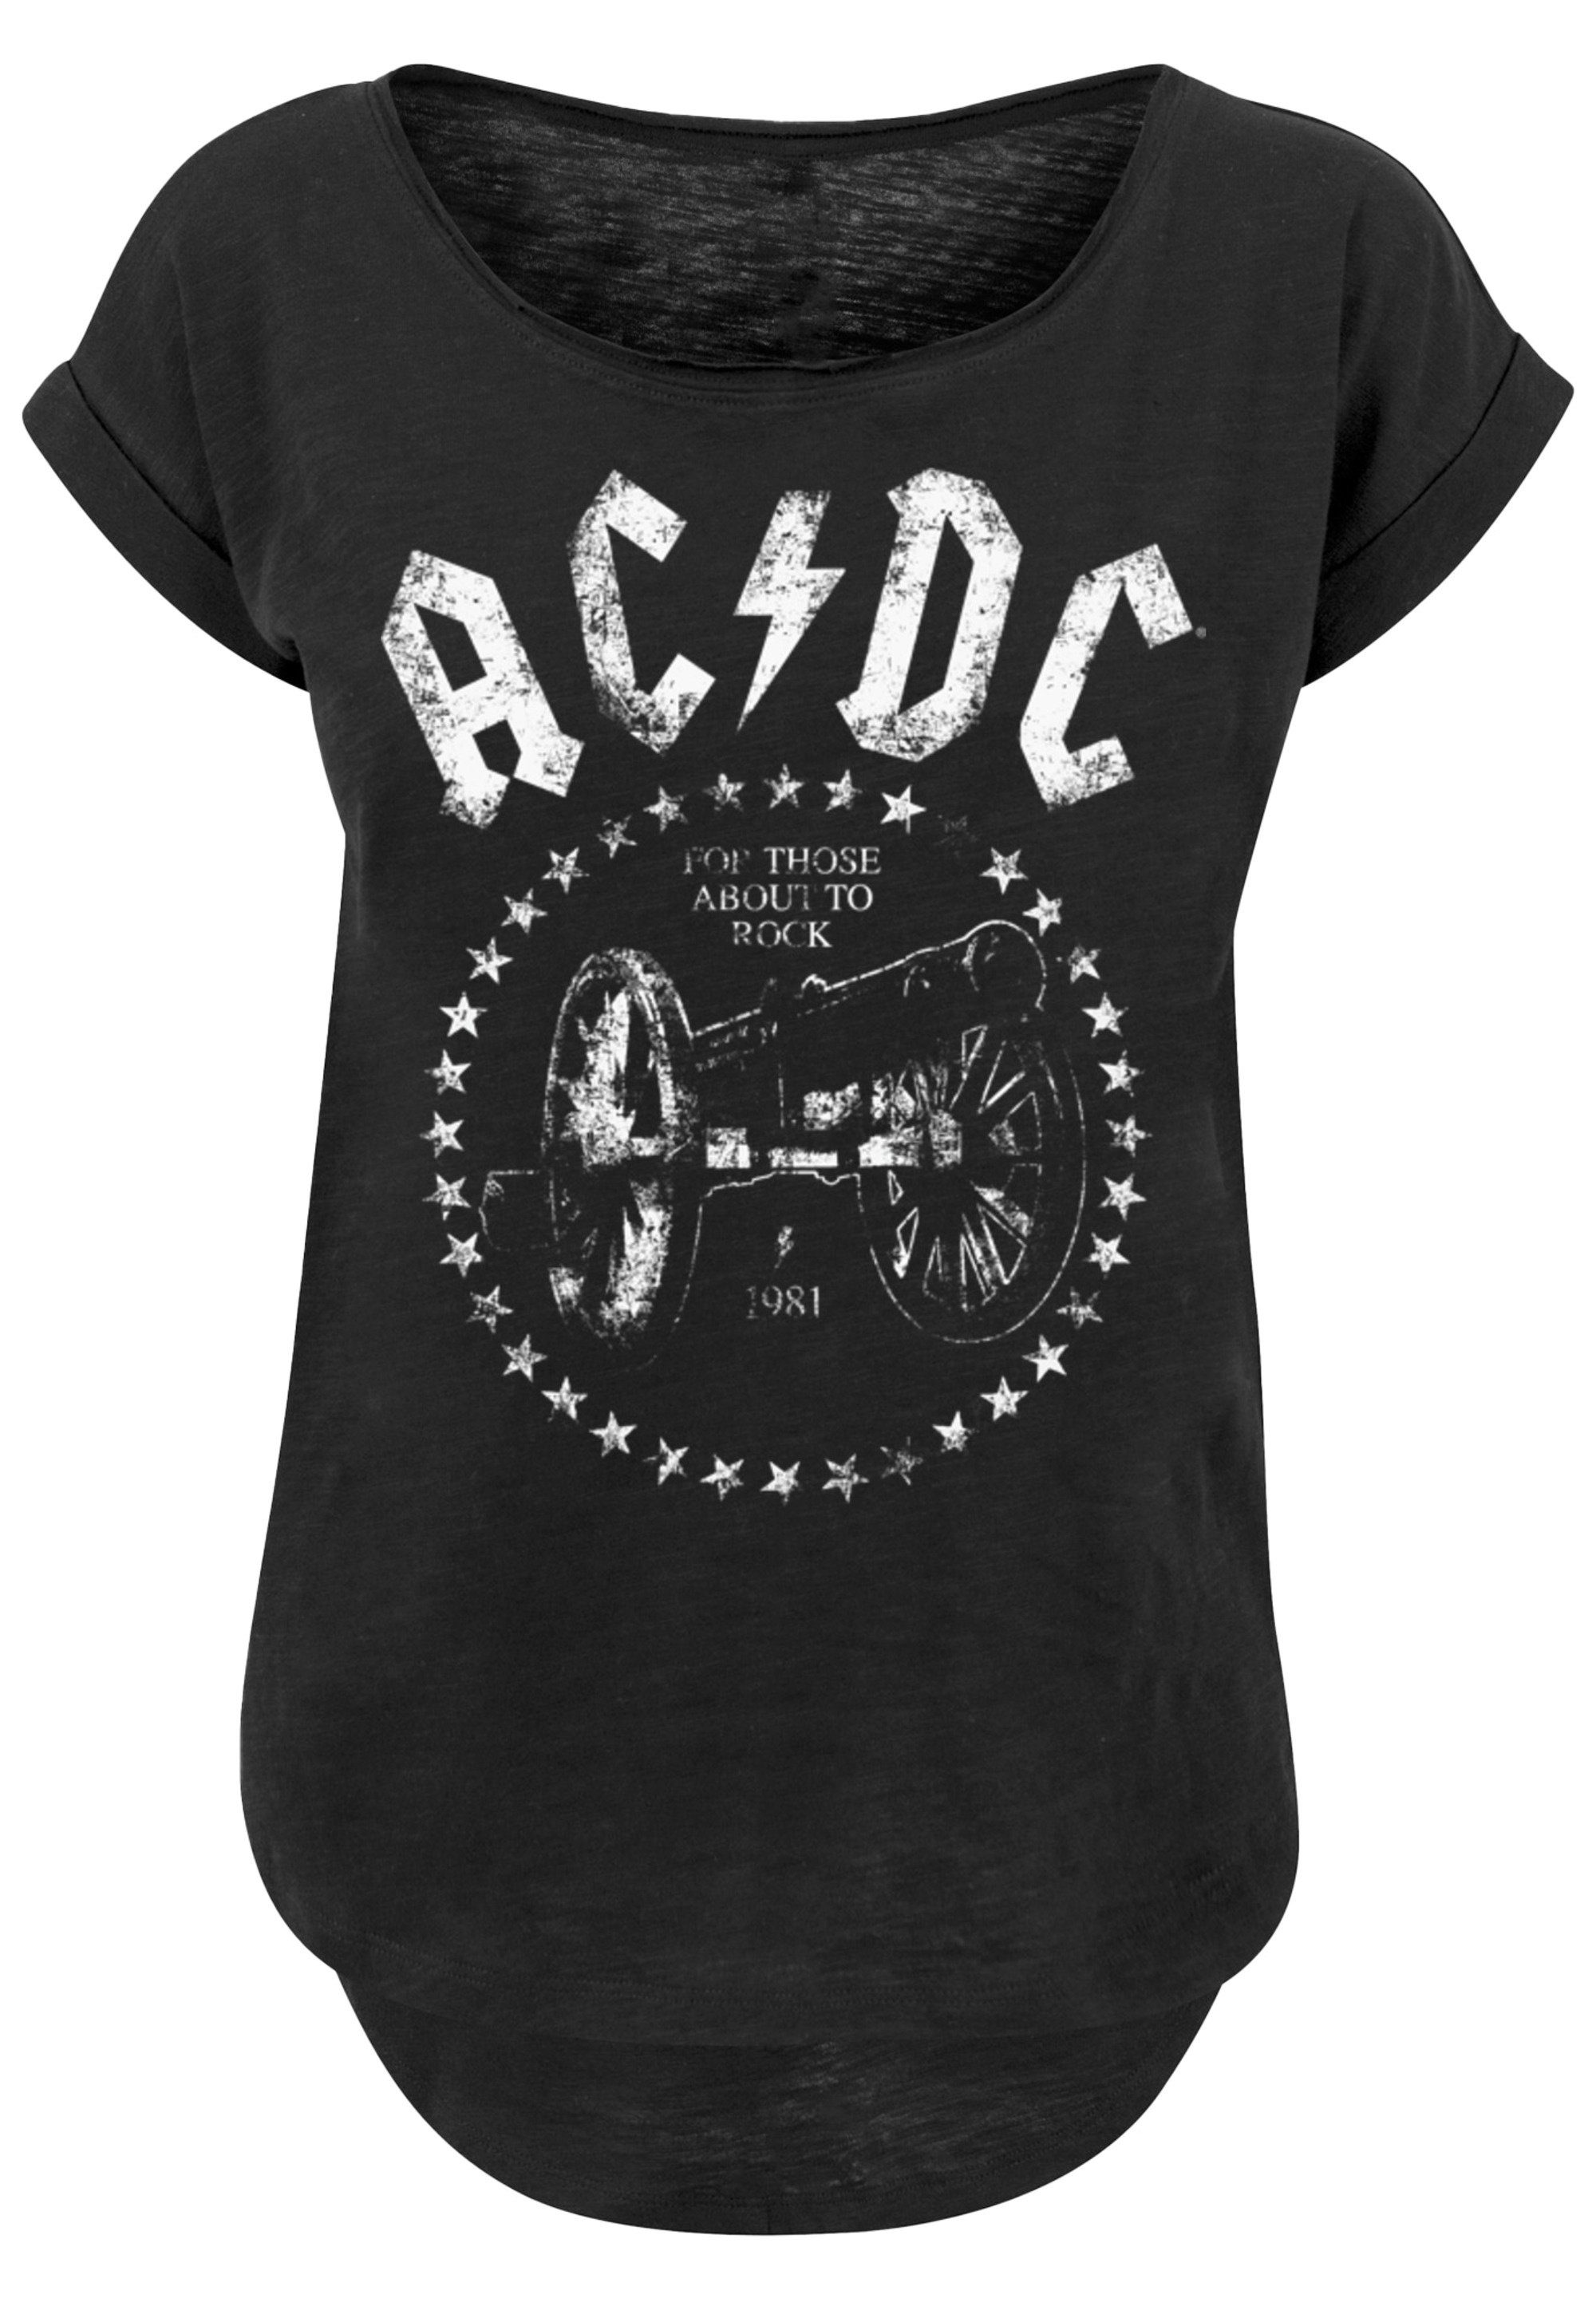 PLUS T-Shirt ACDC We Print Cannon F4NT4STIC Salute You SIZE